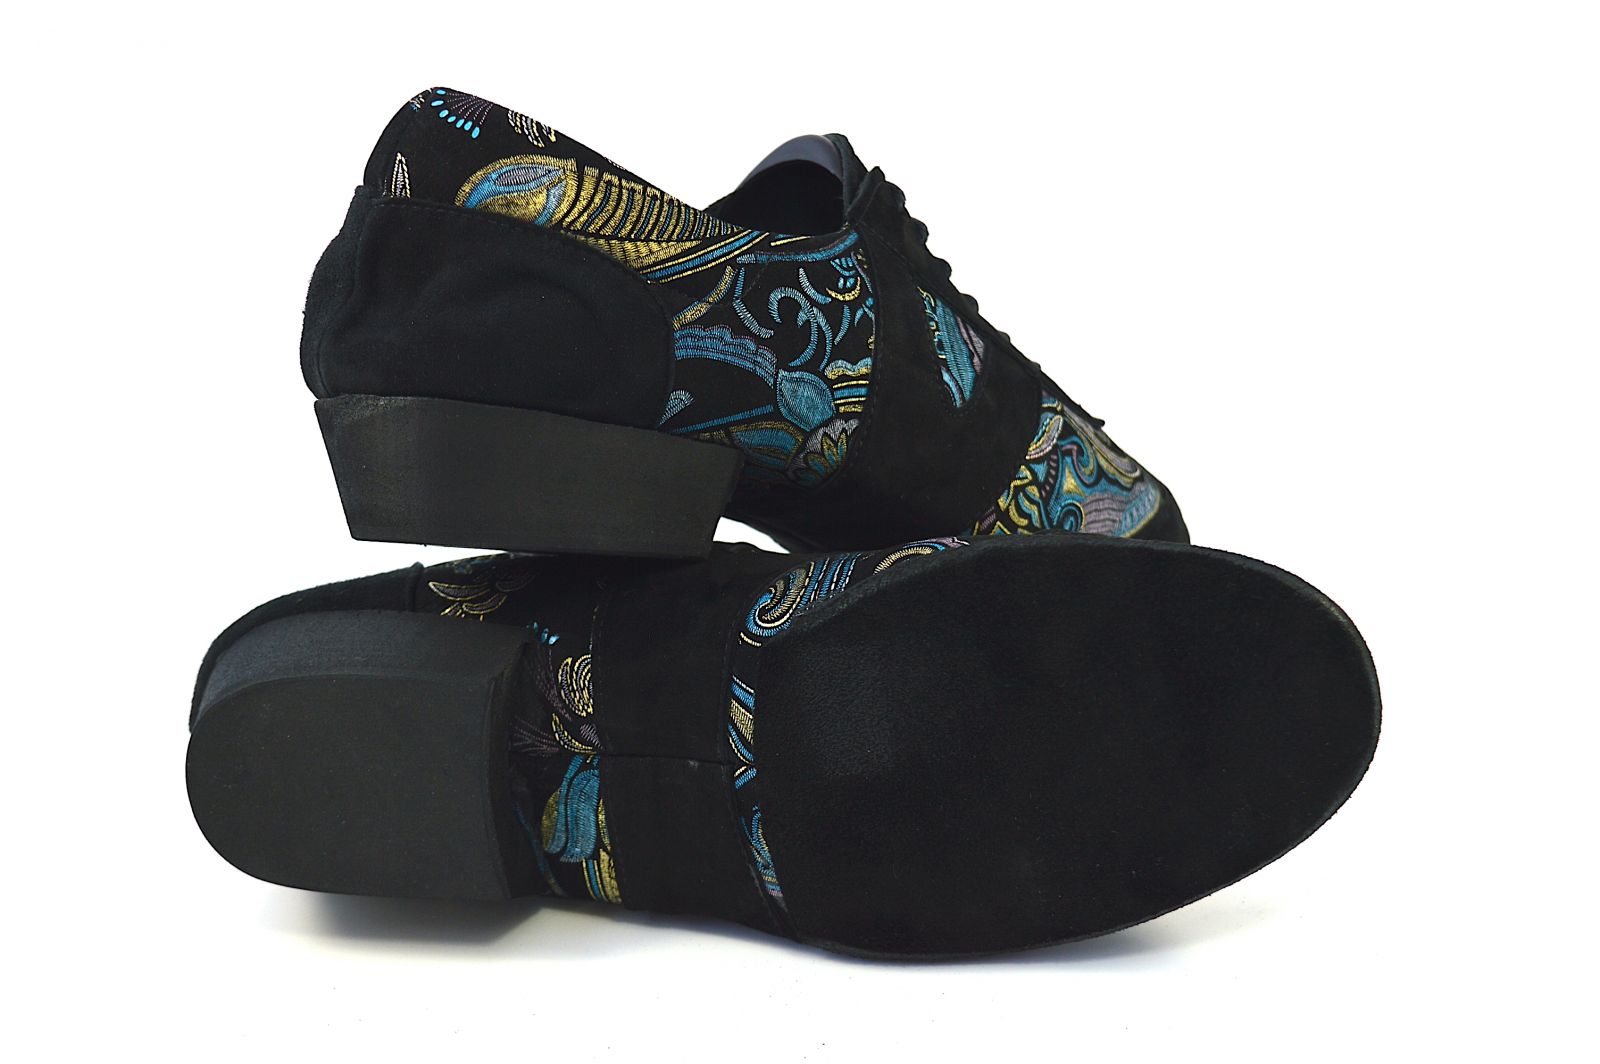 Women's tango dance sneakers shoes, oxford style, by very soft black suede leather and golden-blue prints.